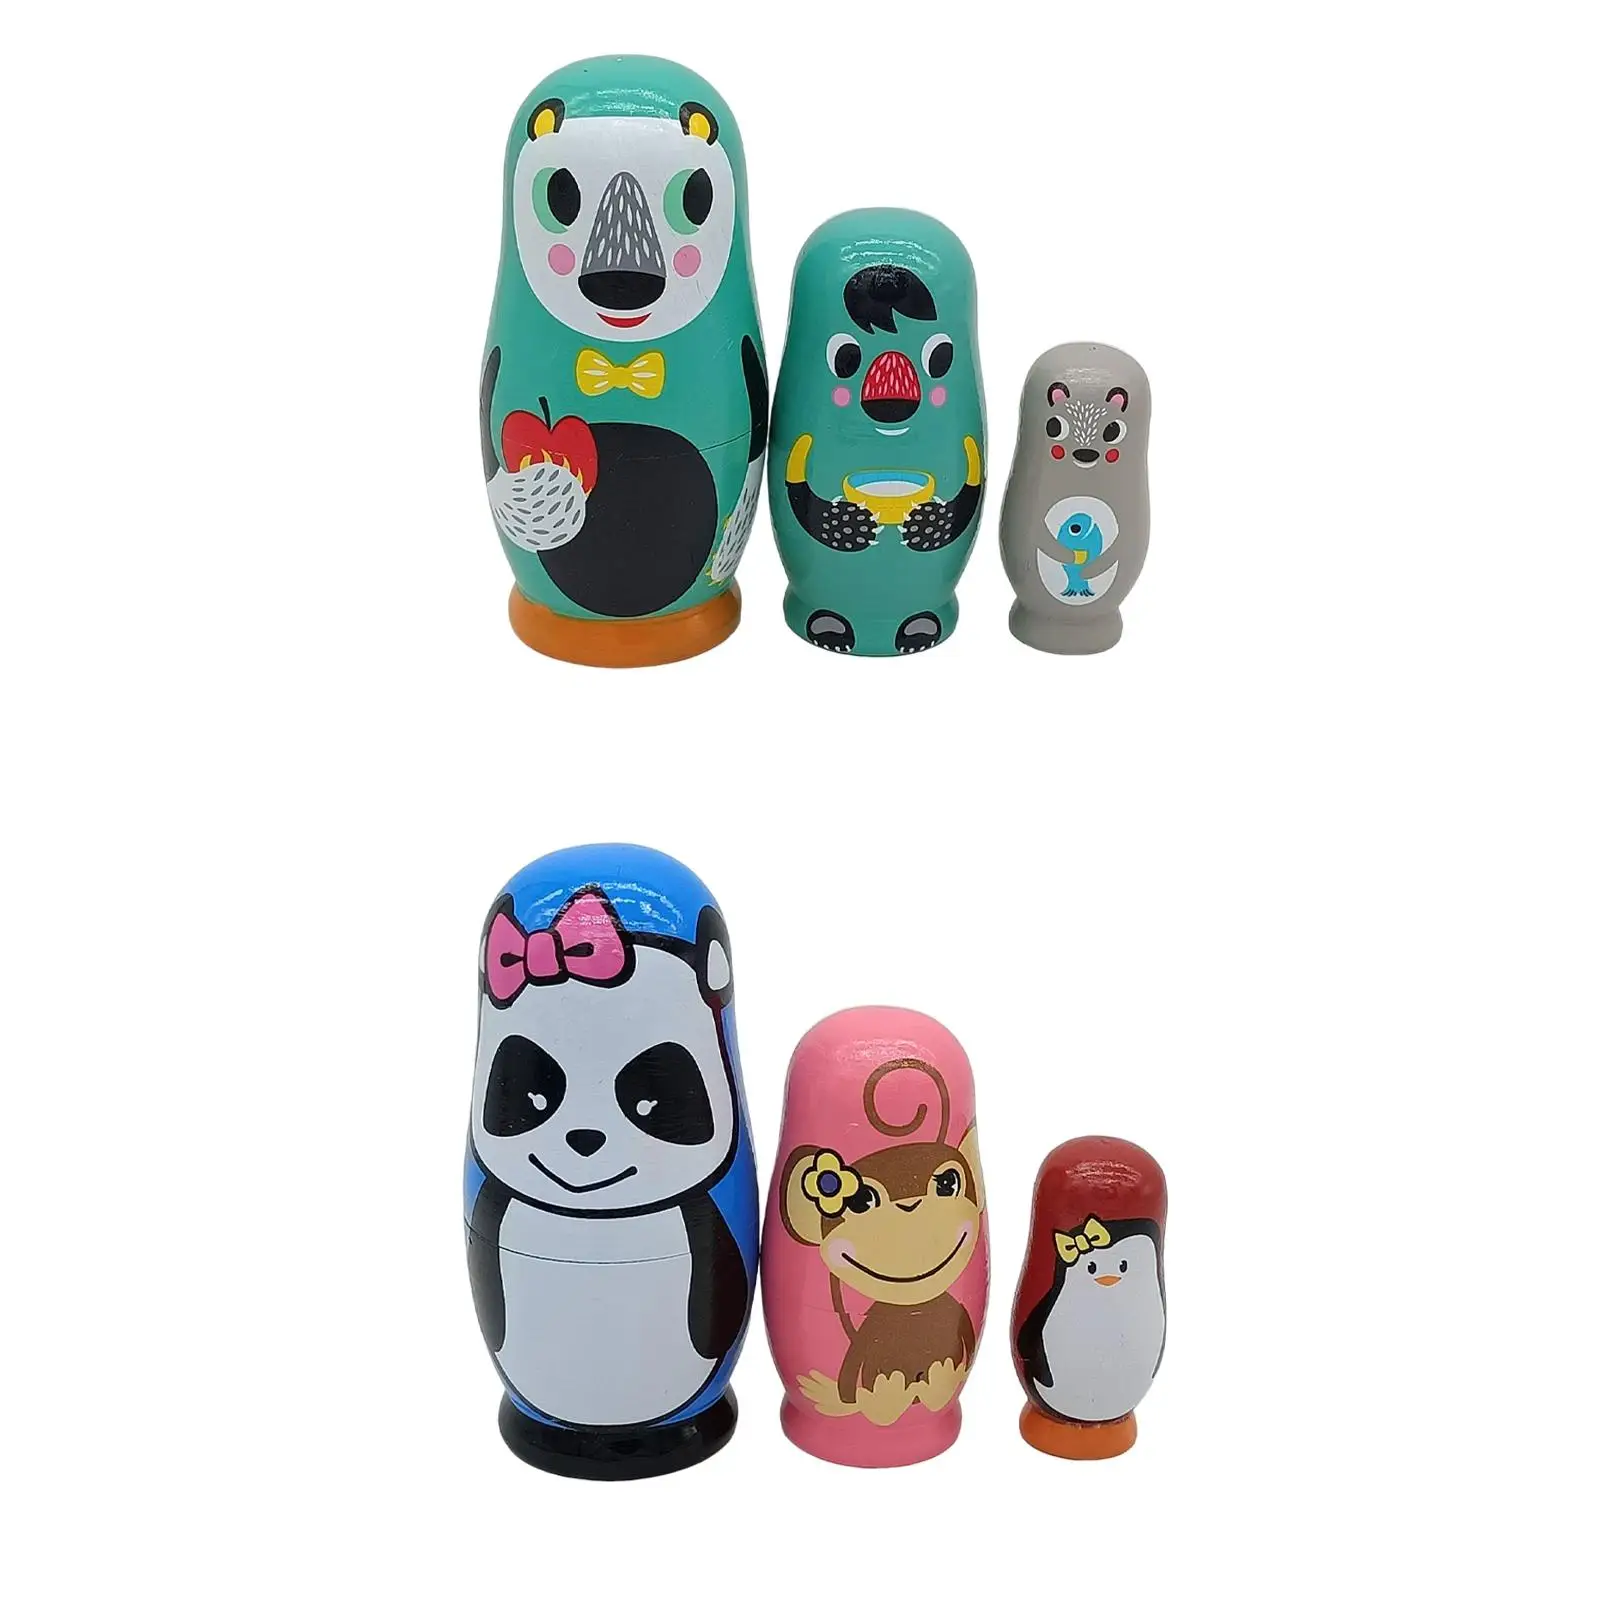 3Pcs Wooden Nesting Dolls Animals Doll Russian Nesting Dolls for Shelf  Decor Stacking Toy Children Gifts Christmas Gifts| | - AliExpress